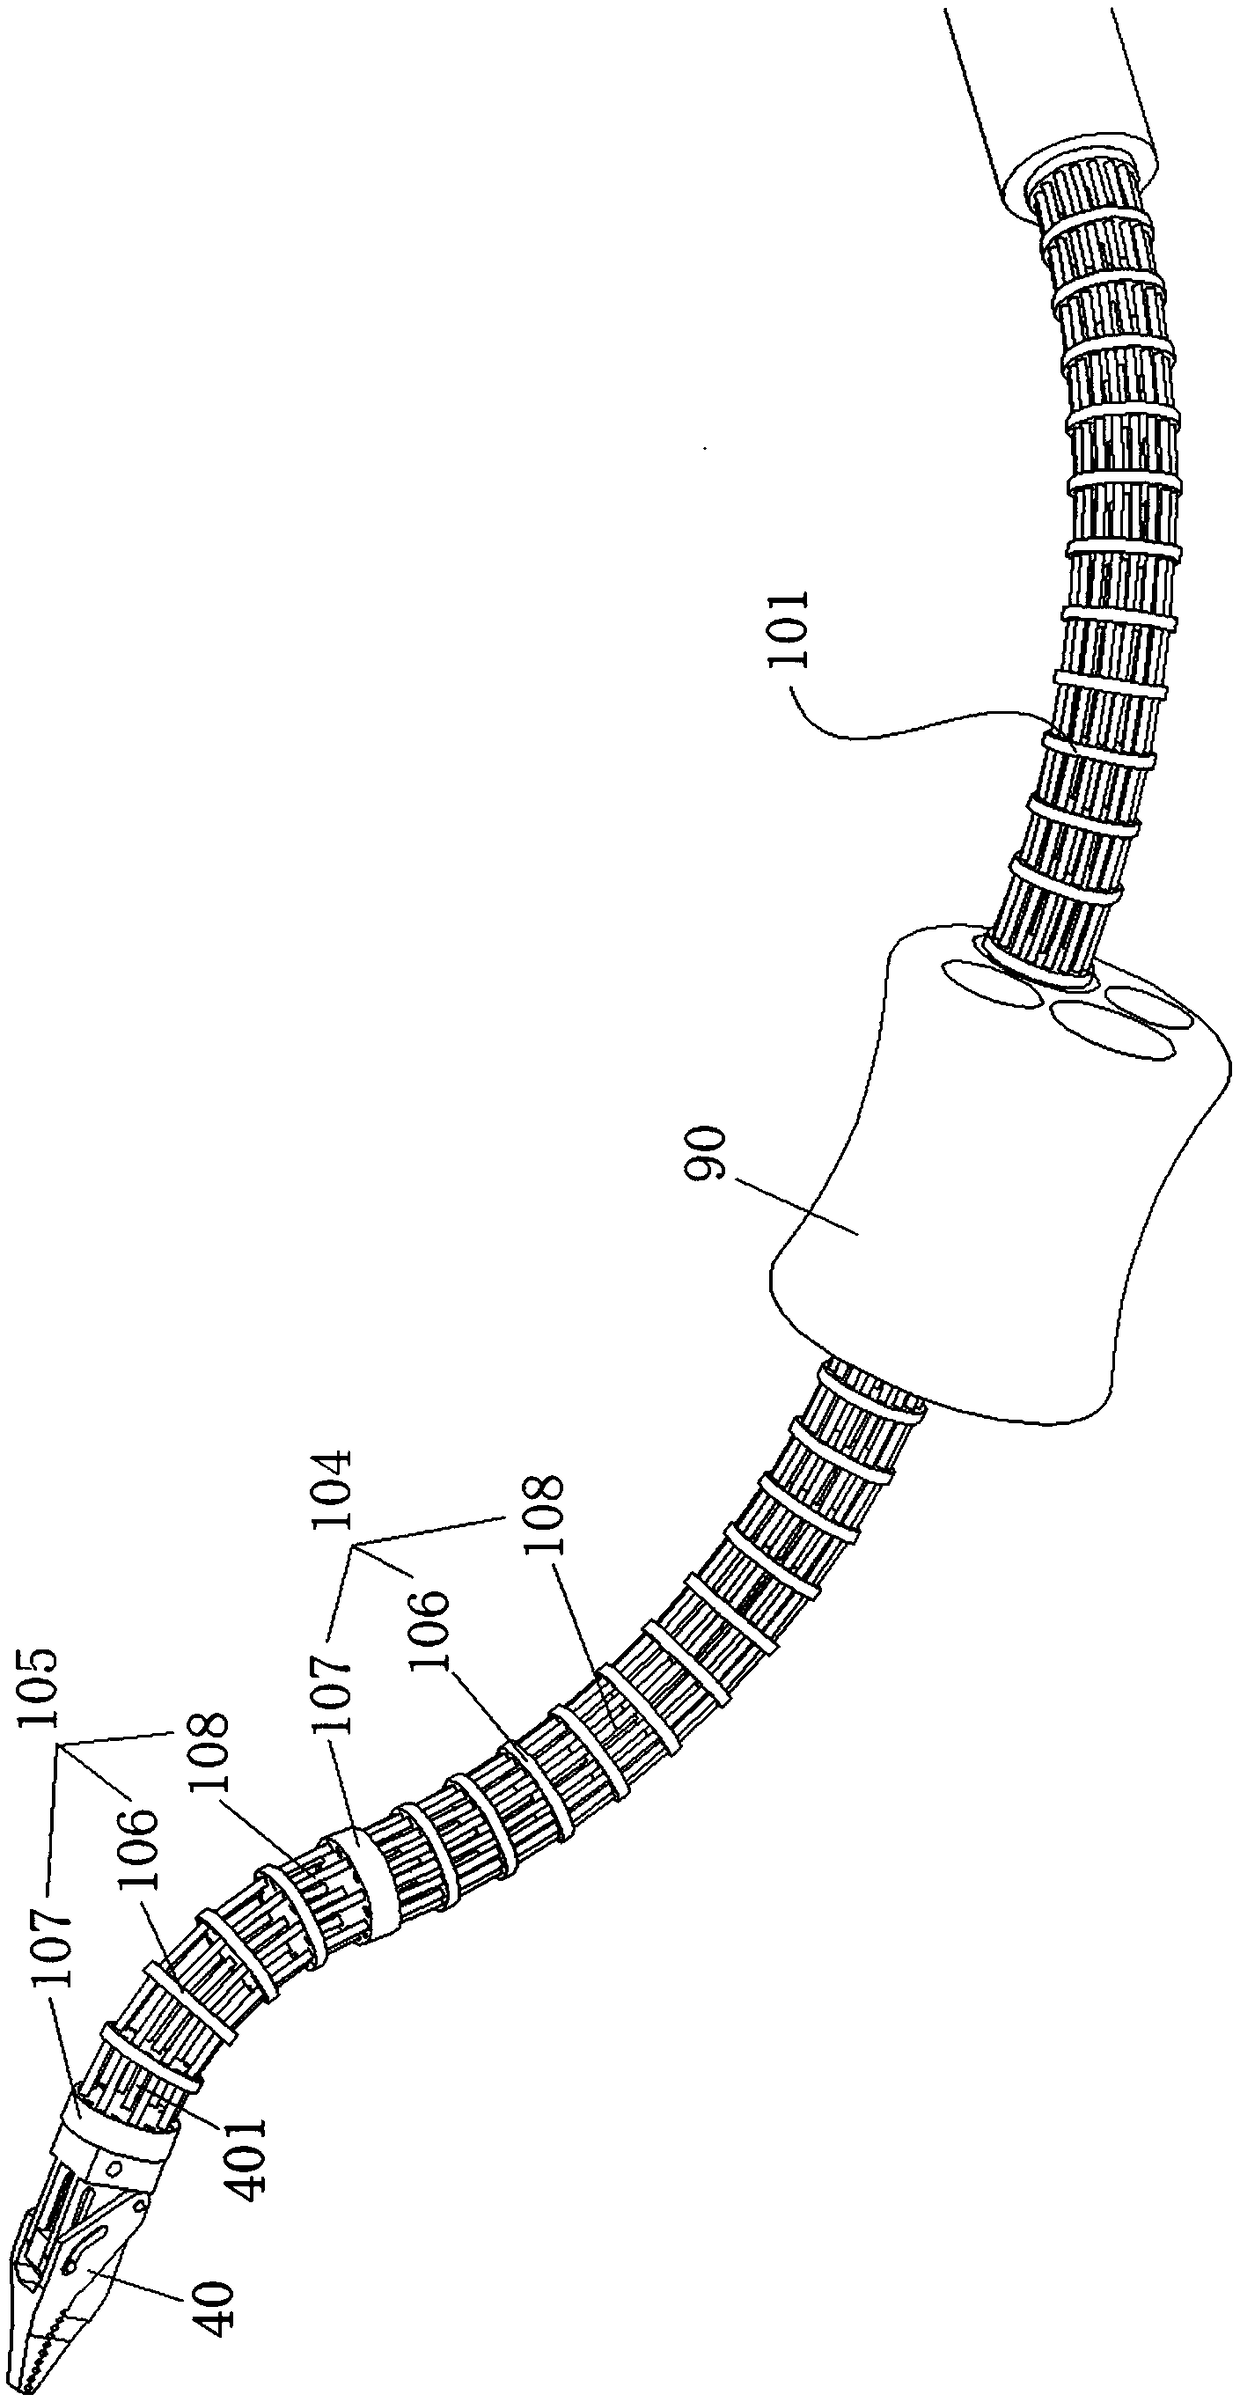 A flexible surgical tool system driven by a double-ended screw